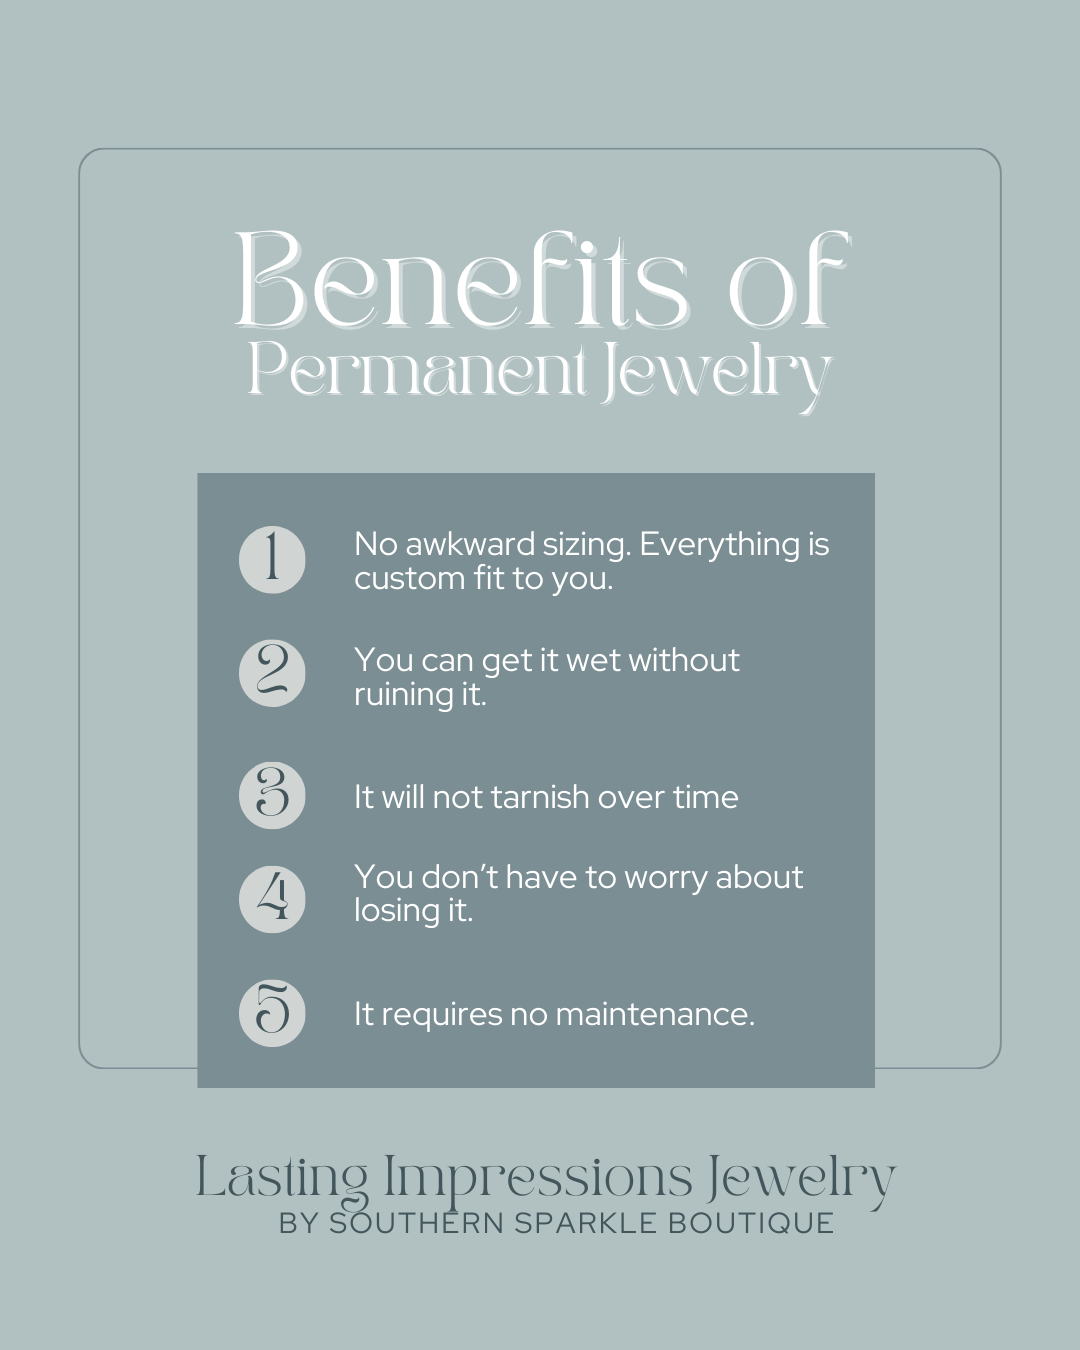 Permanent Jewelry Pop-Up Events